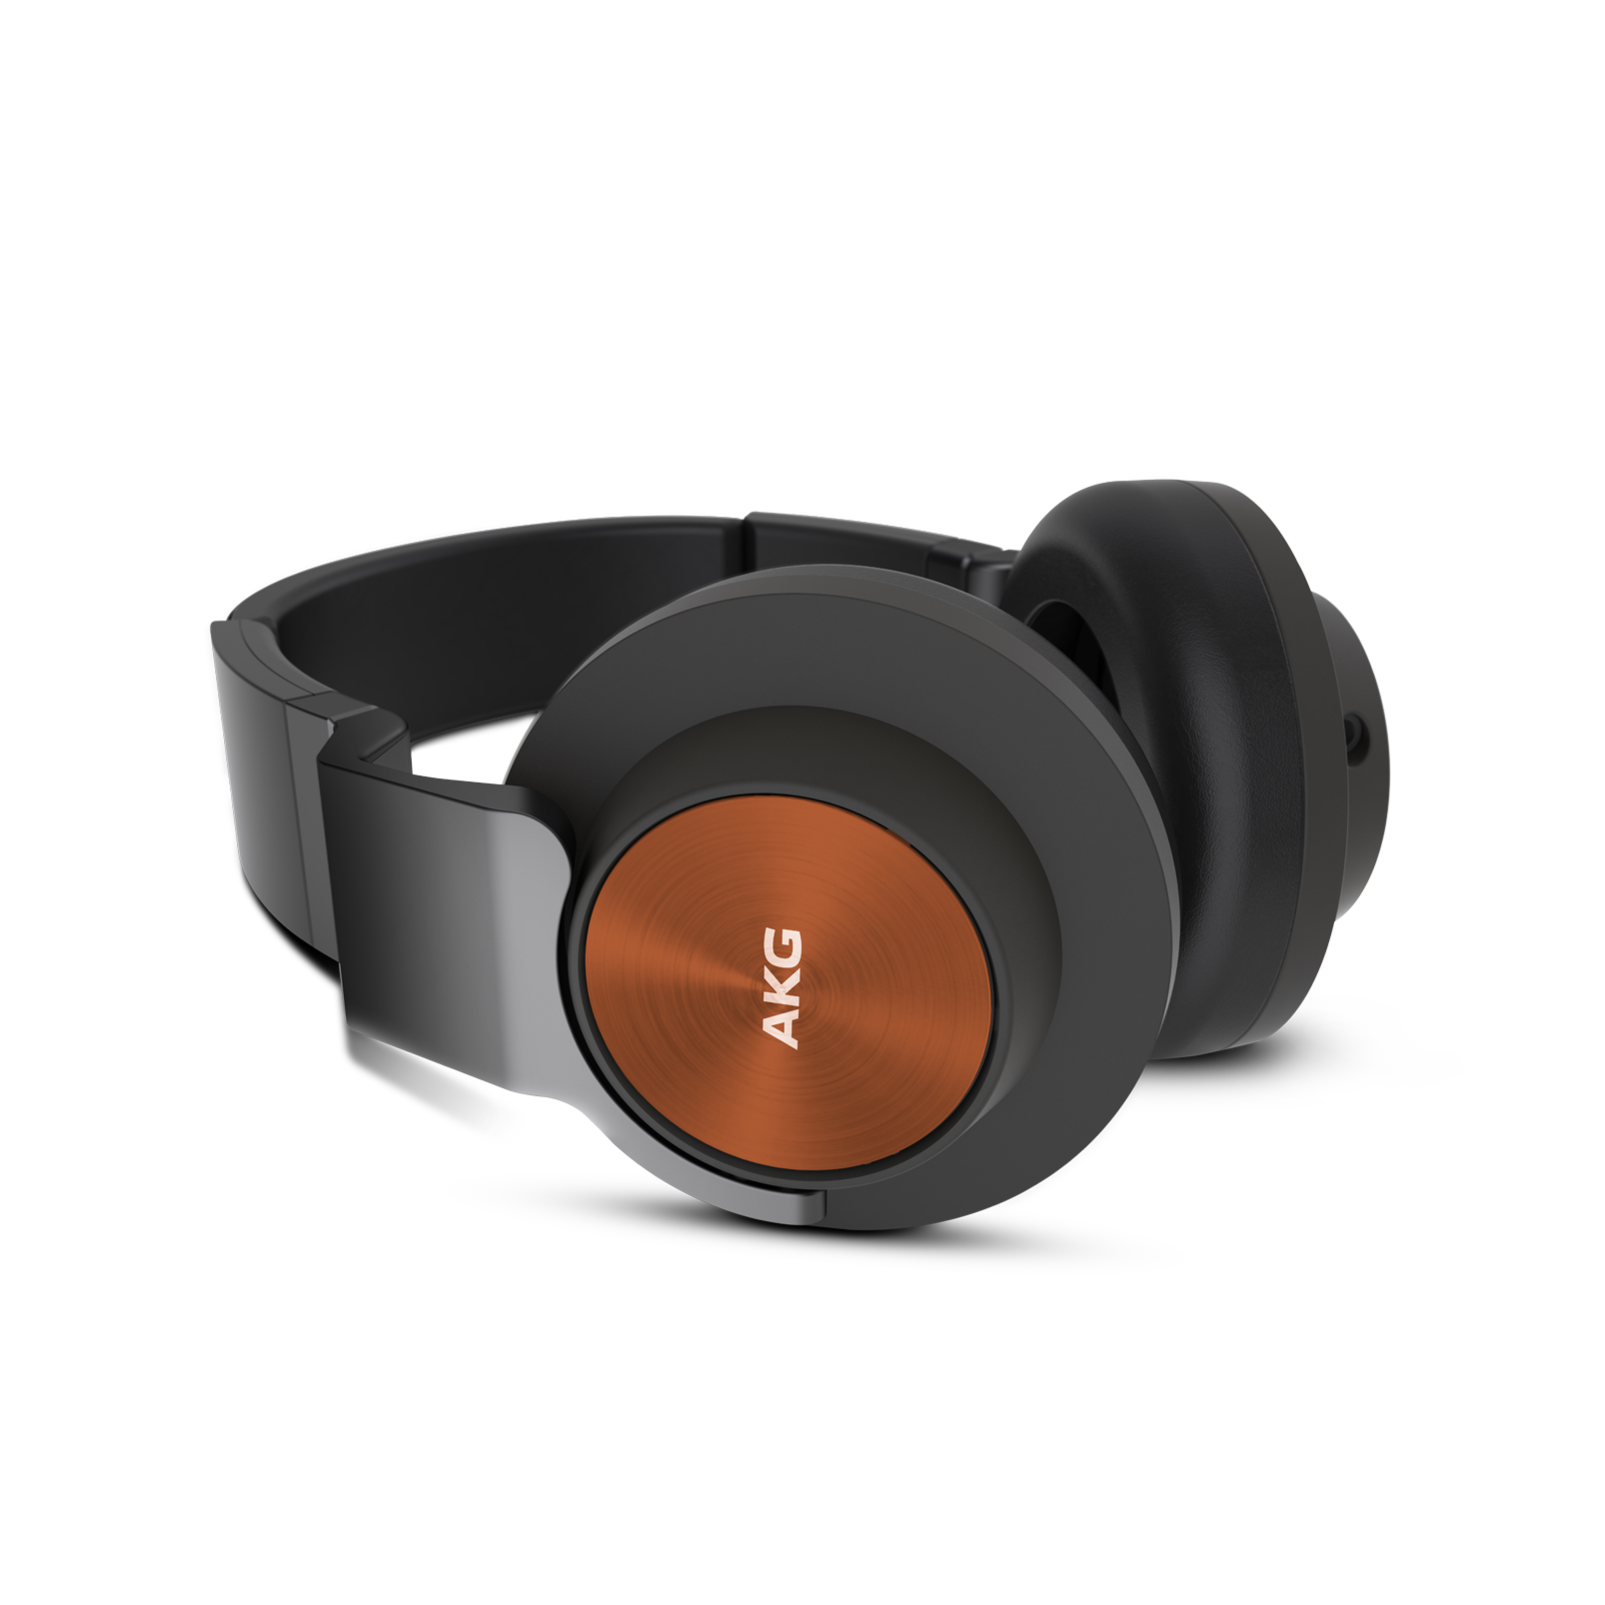 K 545 - Orange / Black - High performance over-ear headphones with microphone and remote - Detailshot 1